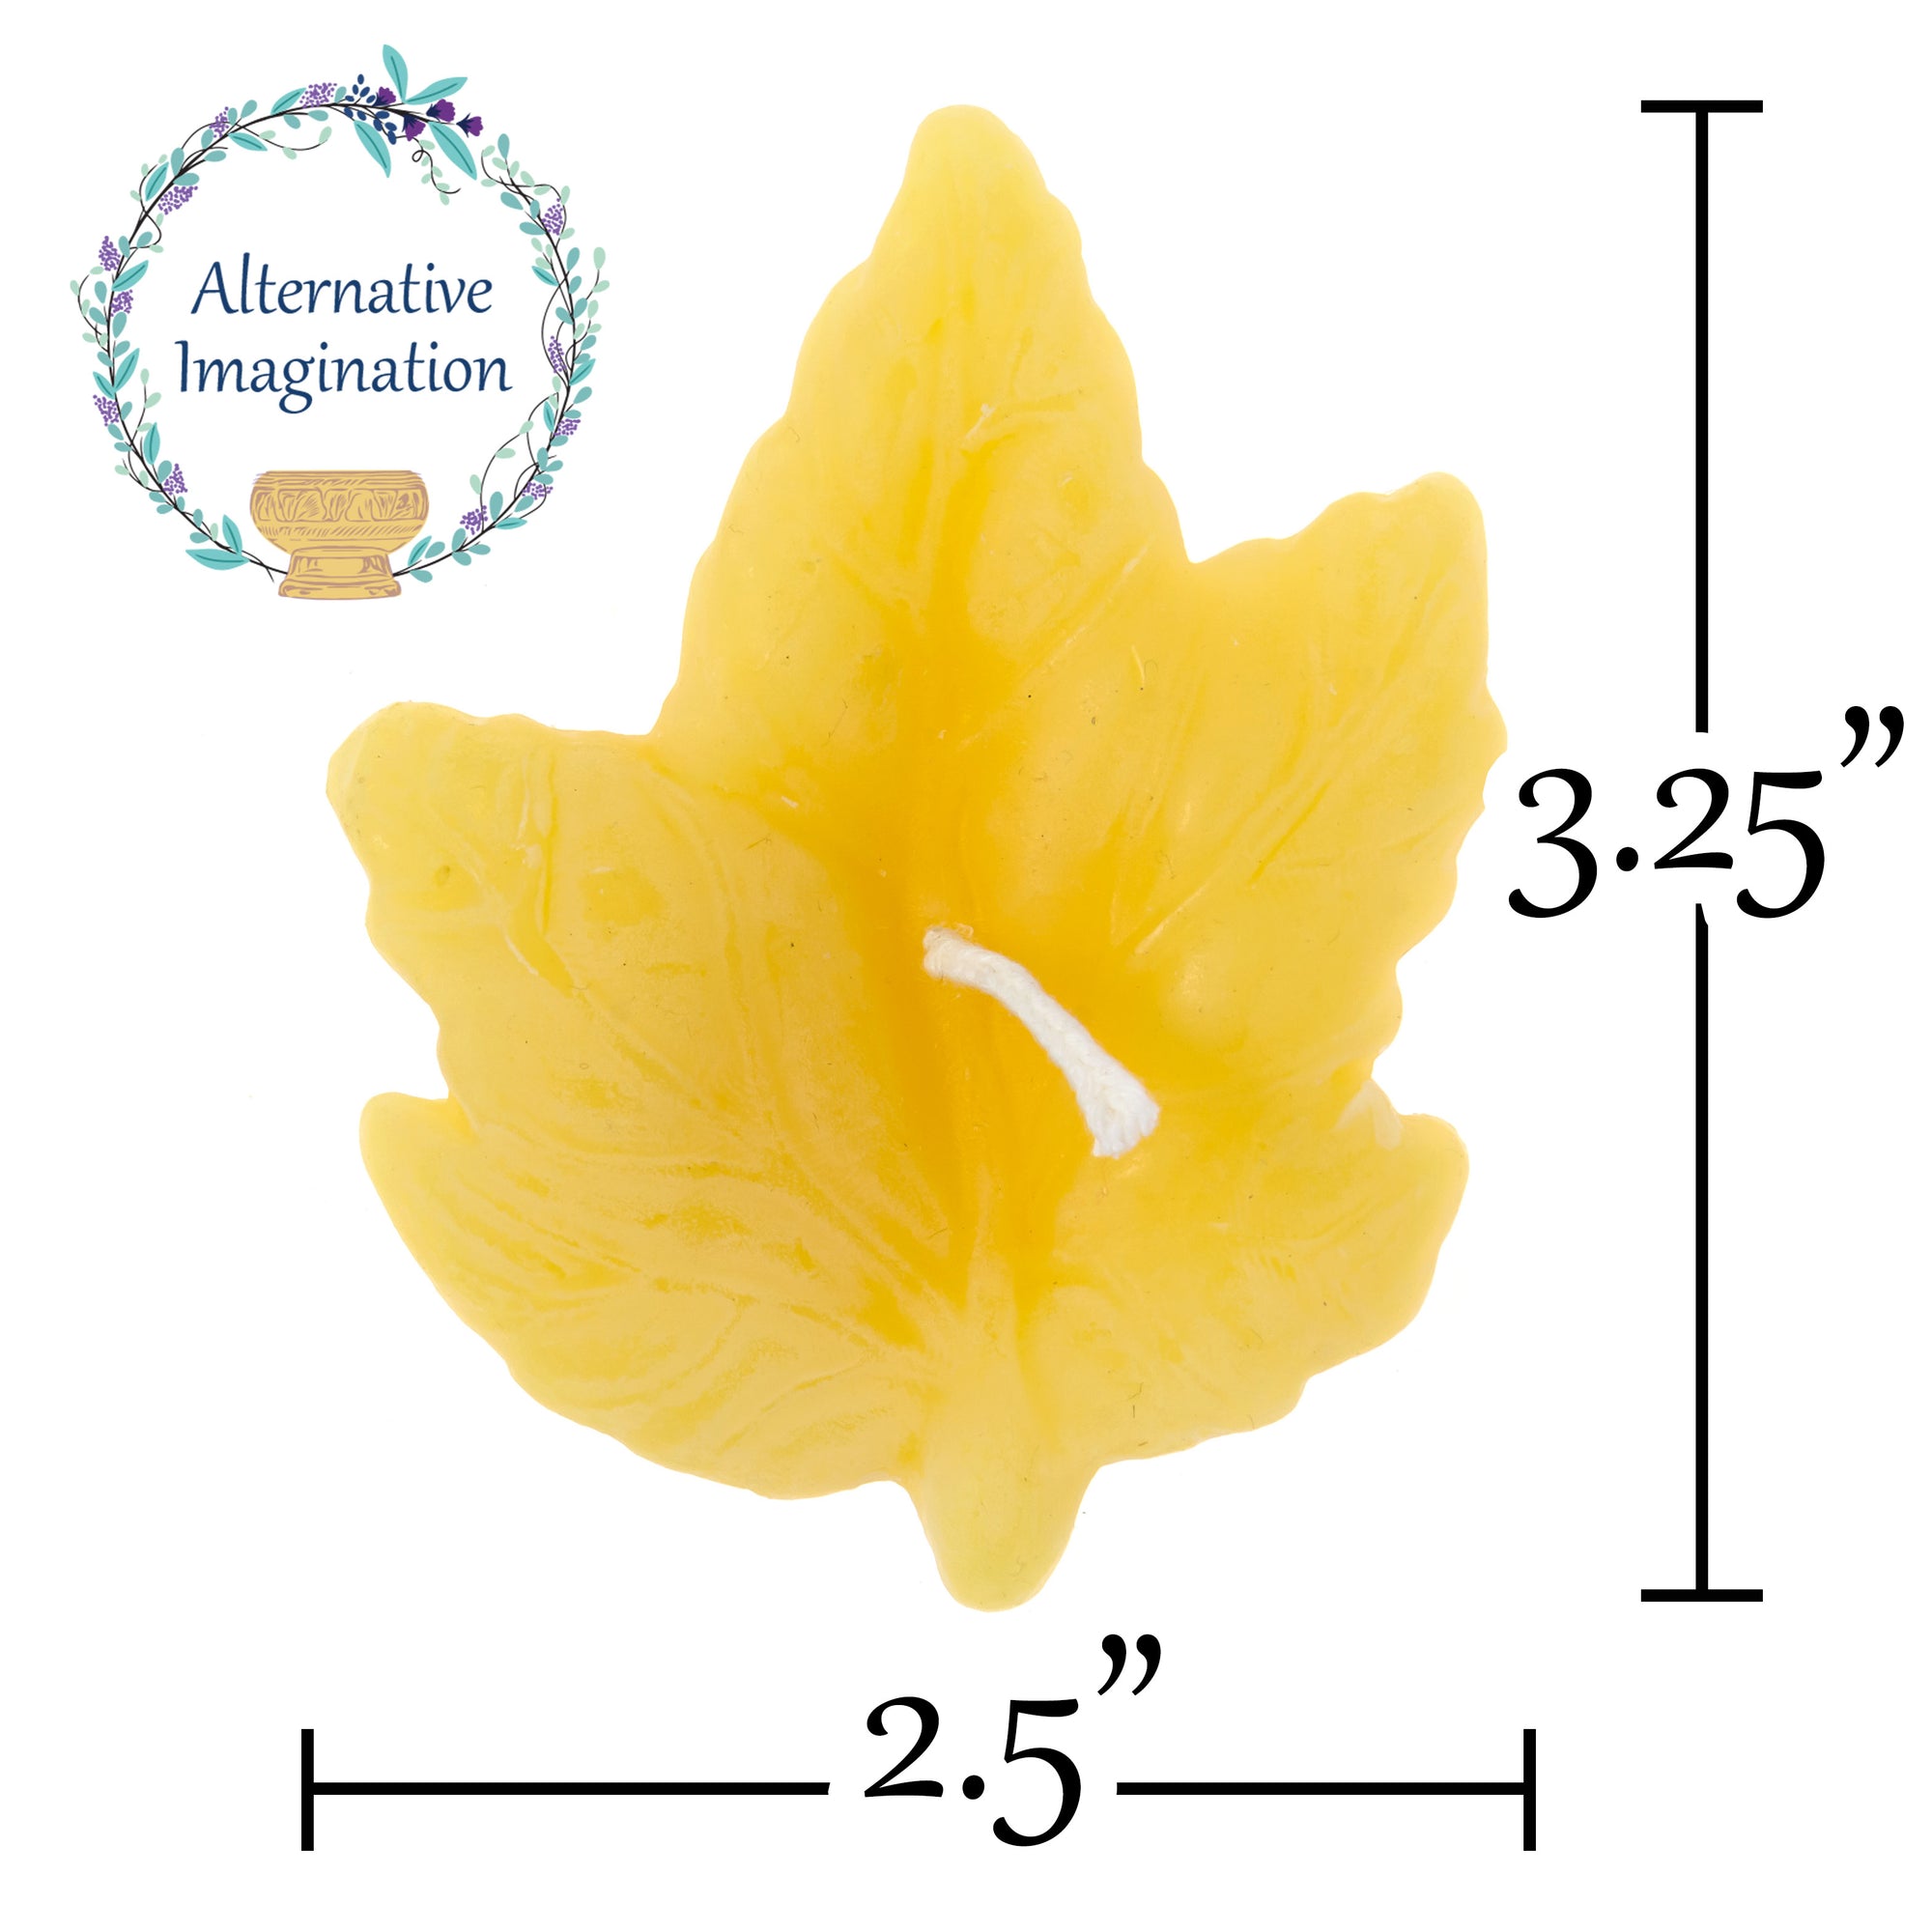 2 Maple Leaves - Shaped Beeswax Candles